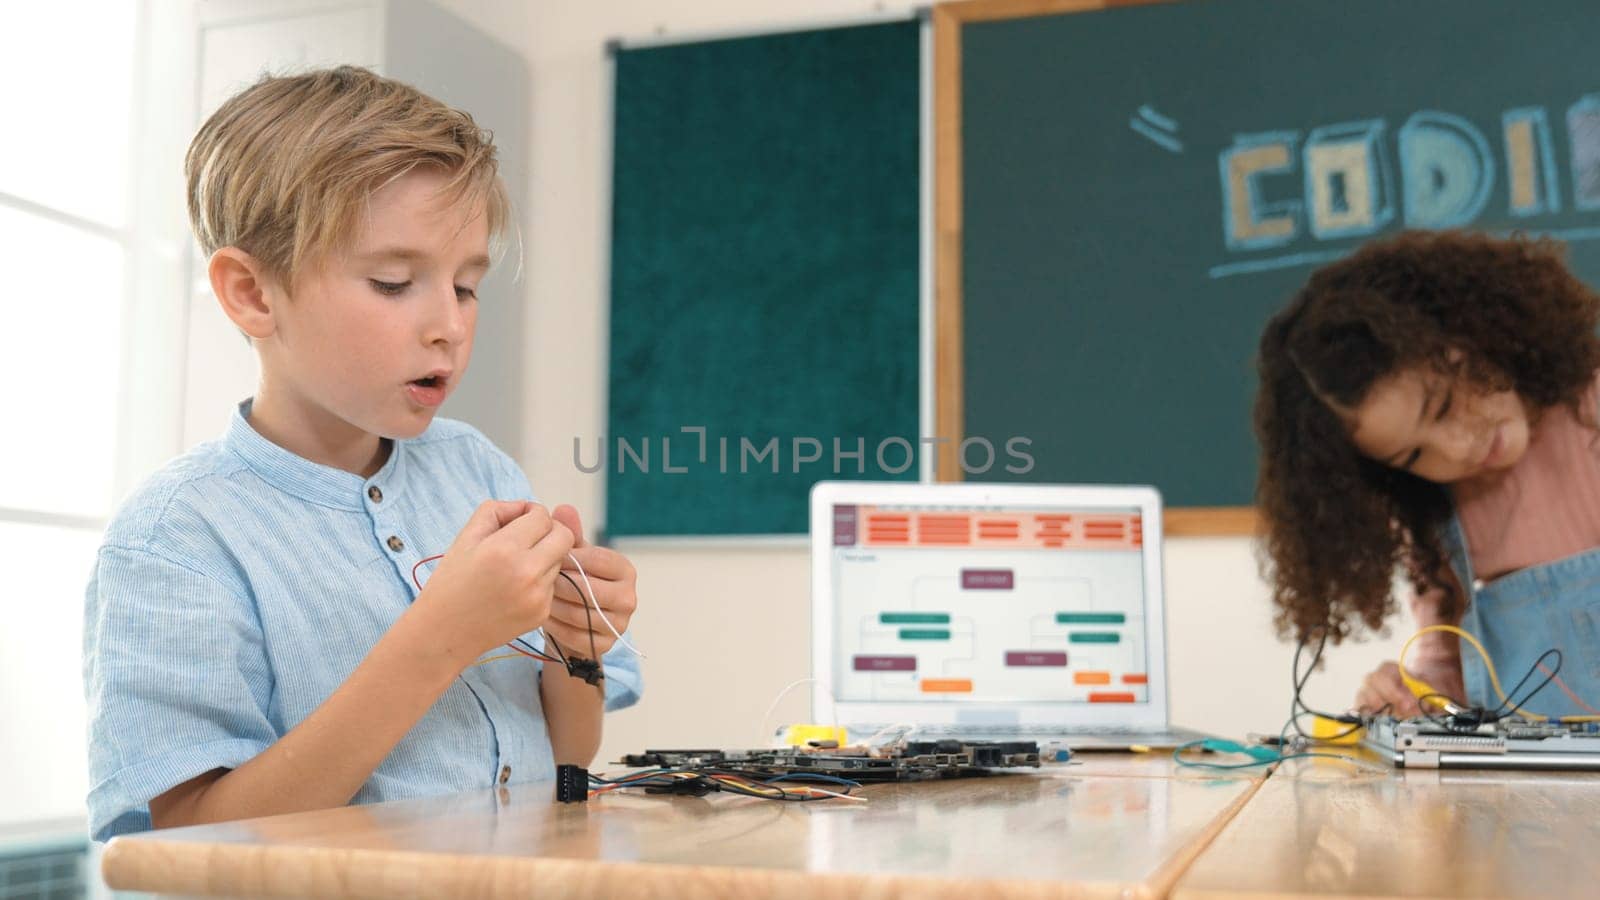 Girl standing while fixing electronic board by using screwdriver. Pedagogy. by biancoblue